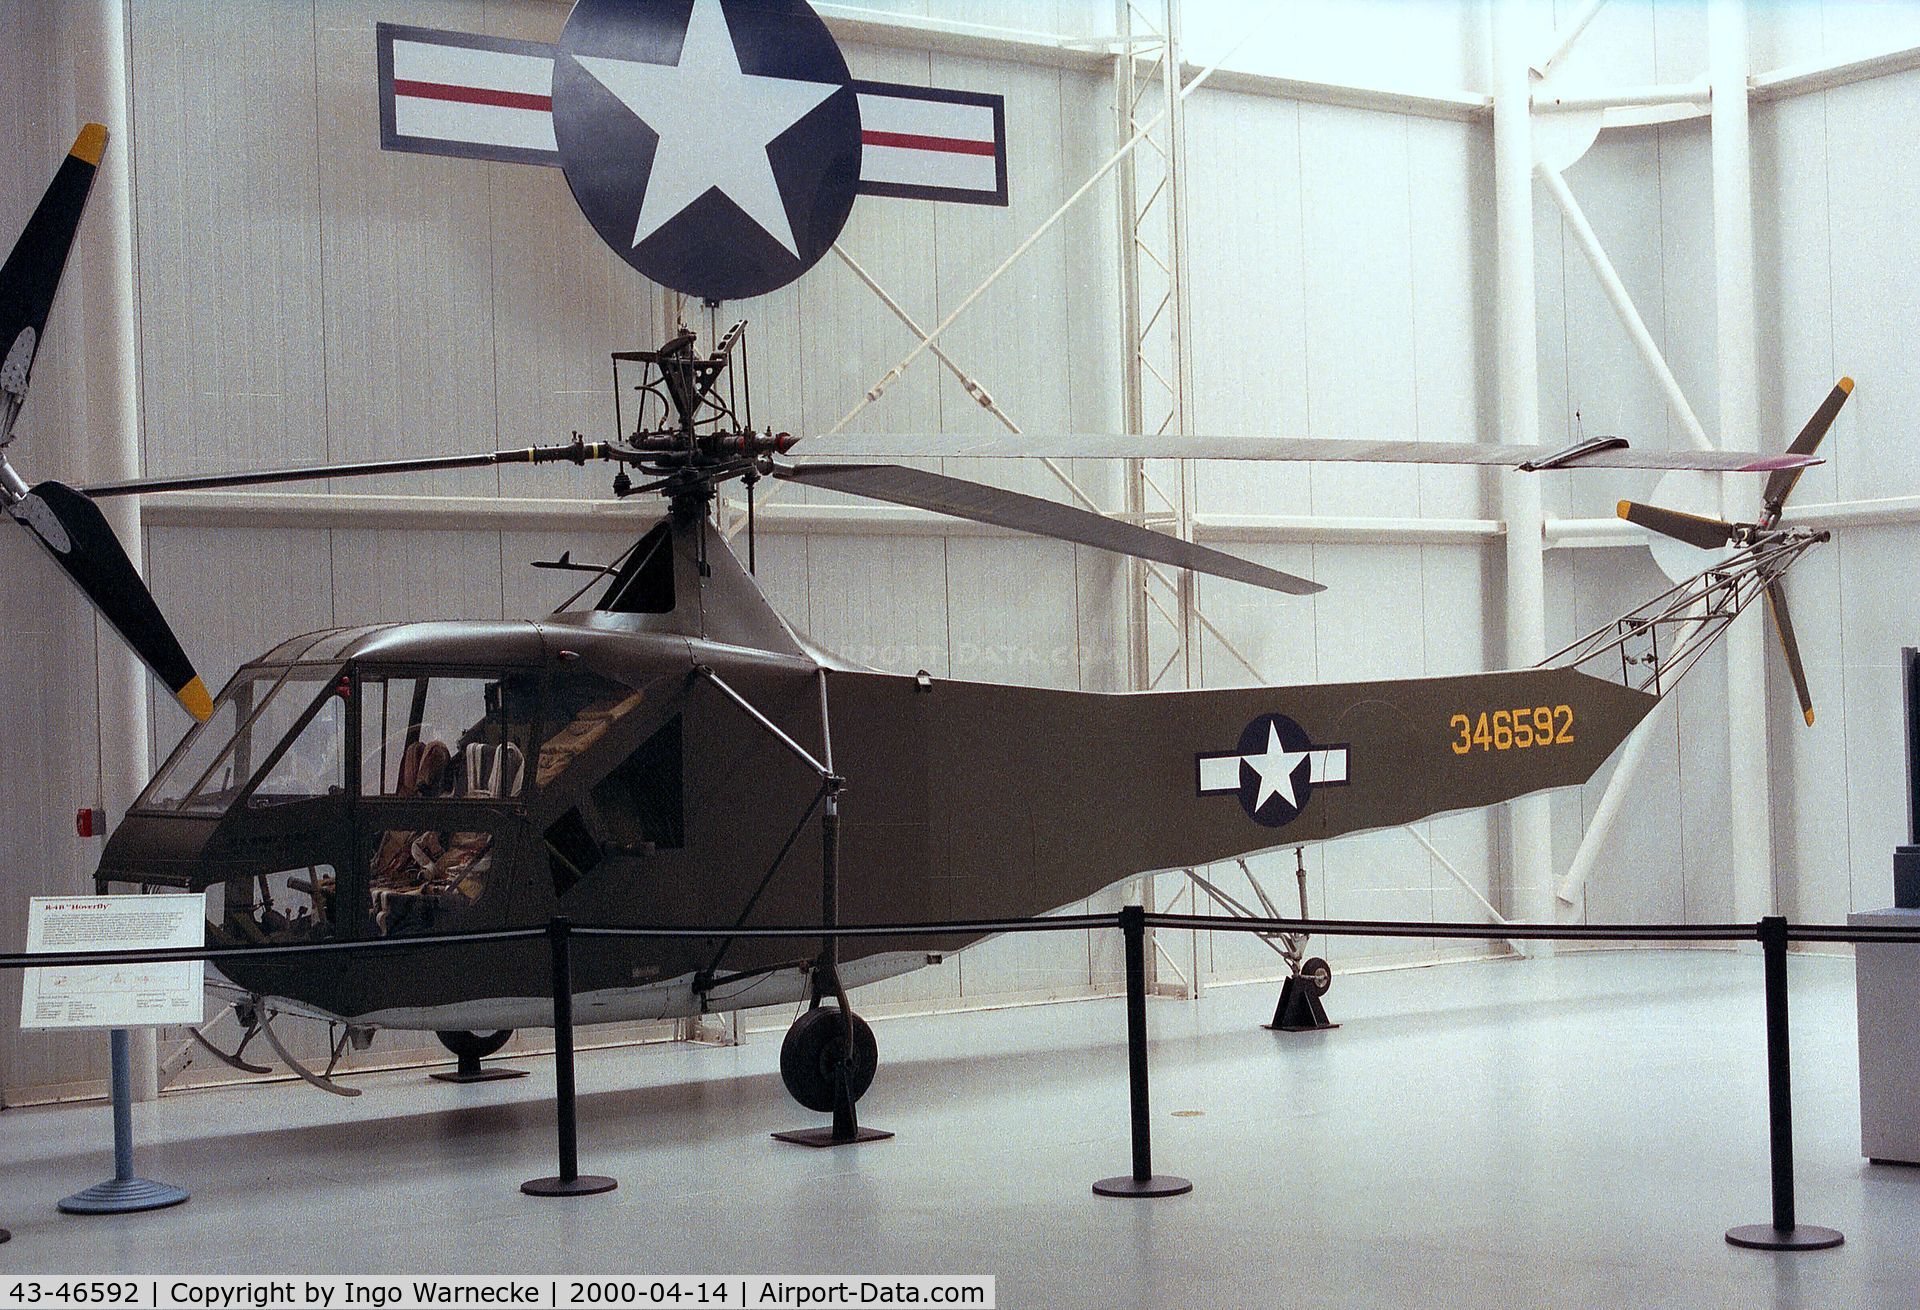 43-46592, 1943 Sikorsky R-4B Hoverfly C/N 136, Sikorsky R-4B Hoverfly of the US Army Aviation at the Army Aviation Museum, Ft Rucker AL